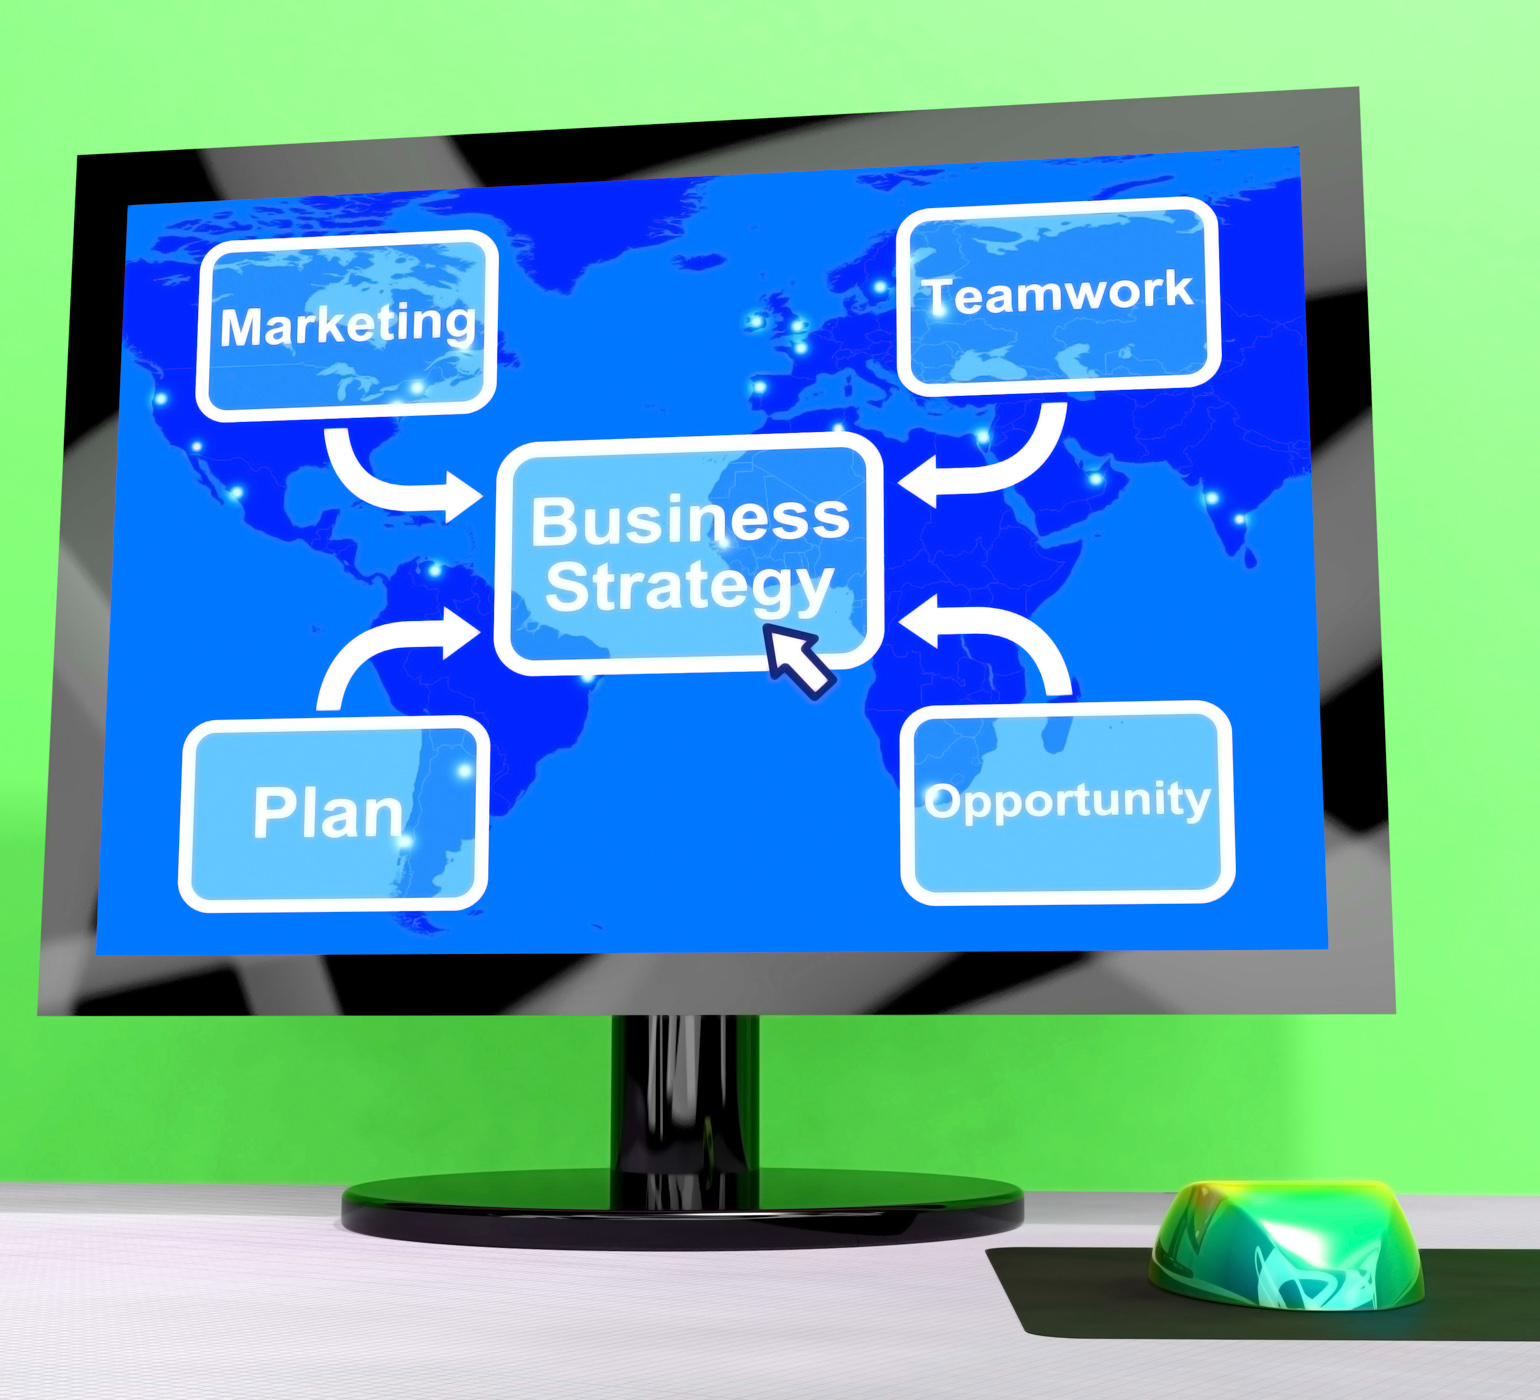 Business strategy diagram showing teamwork and planning photo